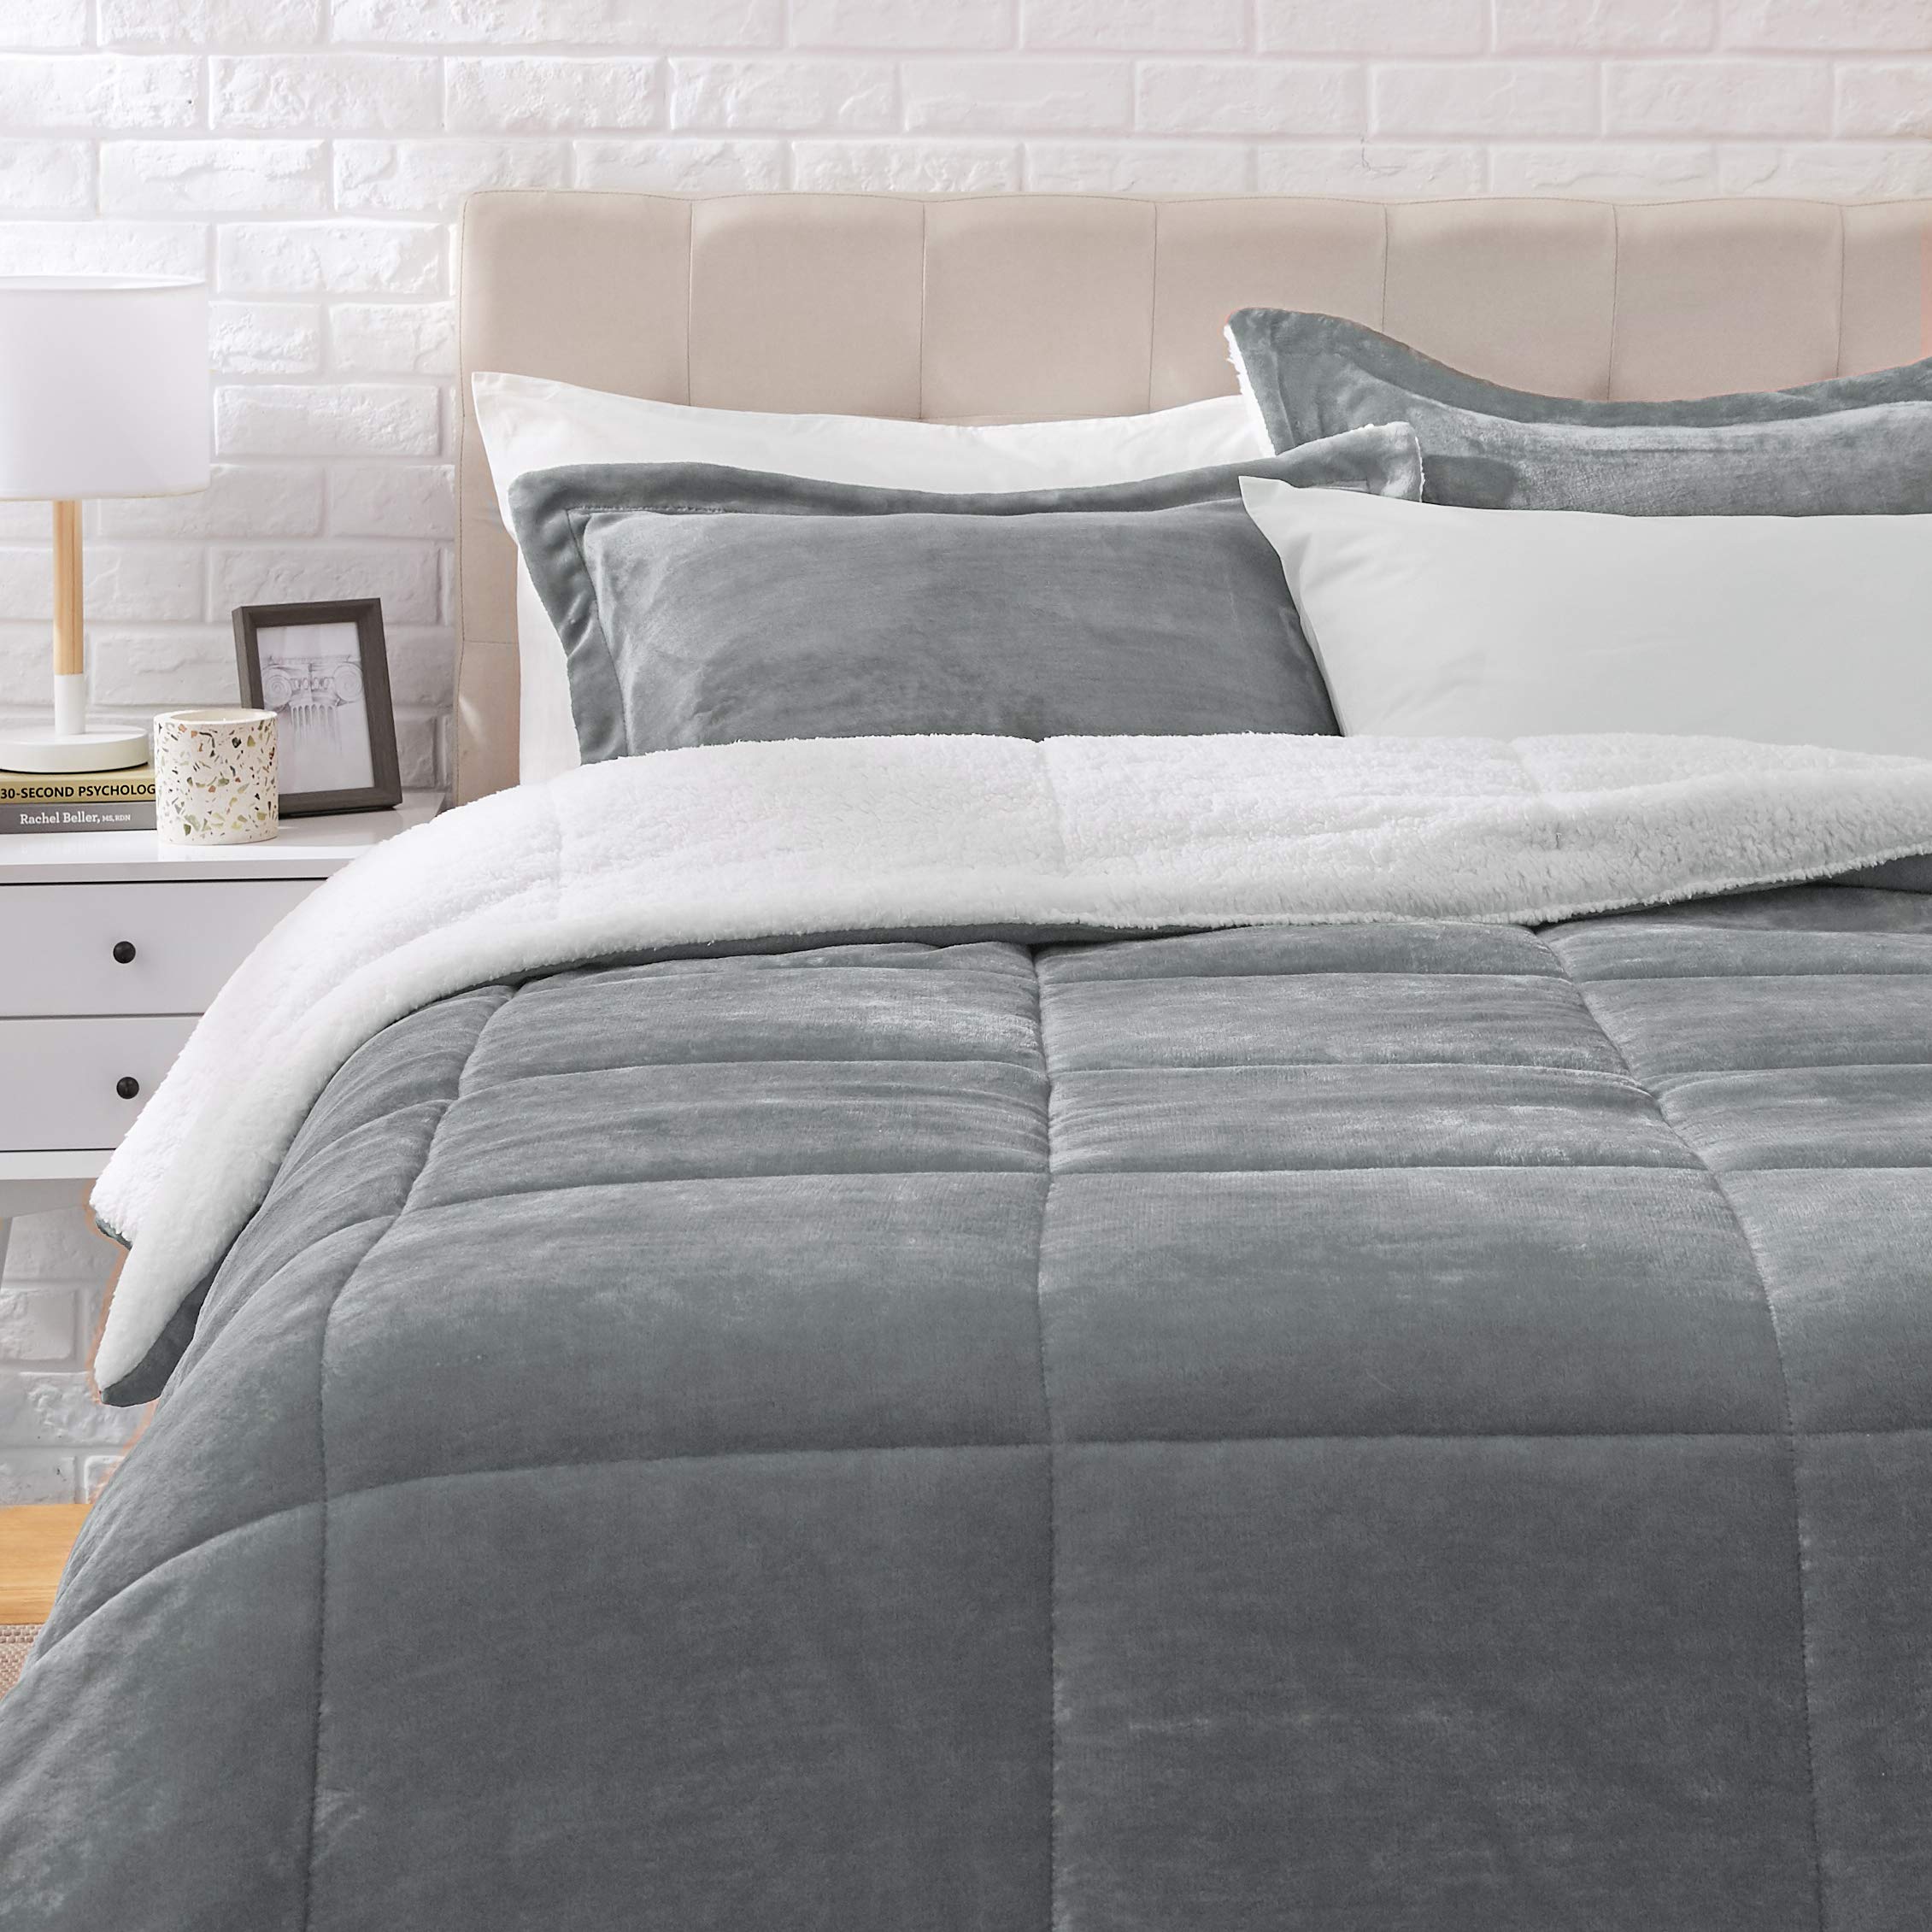 Book Cover Amazon Basics Ultra-Soft Micromink Sherpa Comforter Bed Set - Charcoal, King